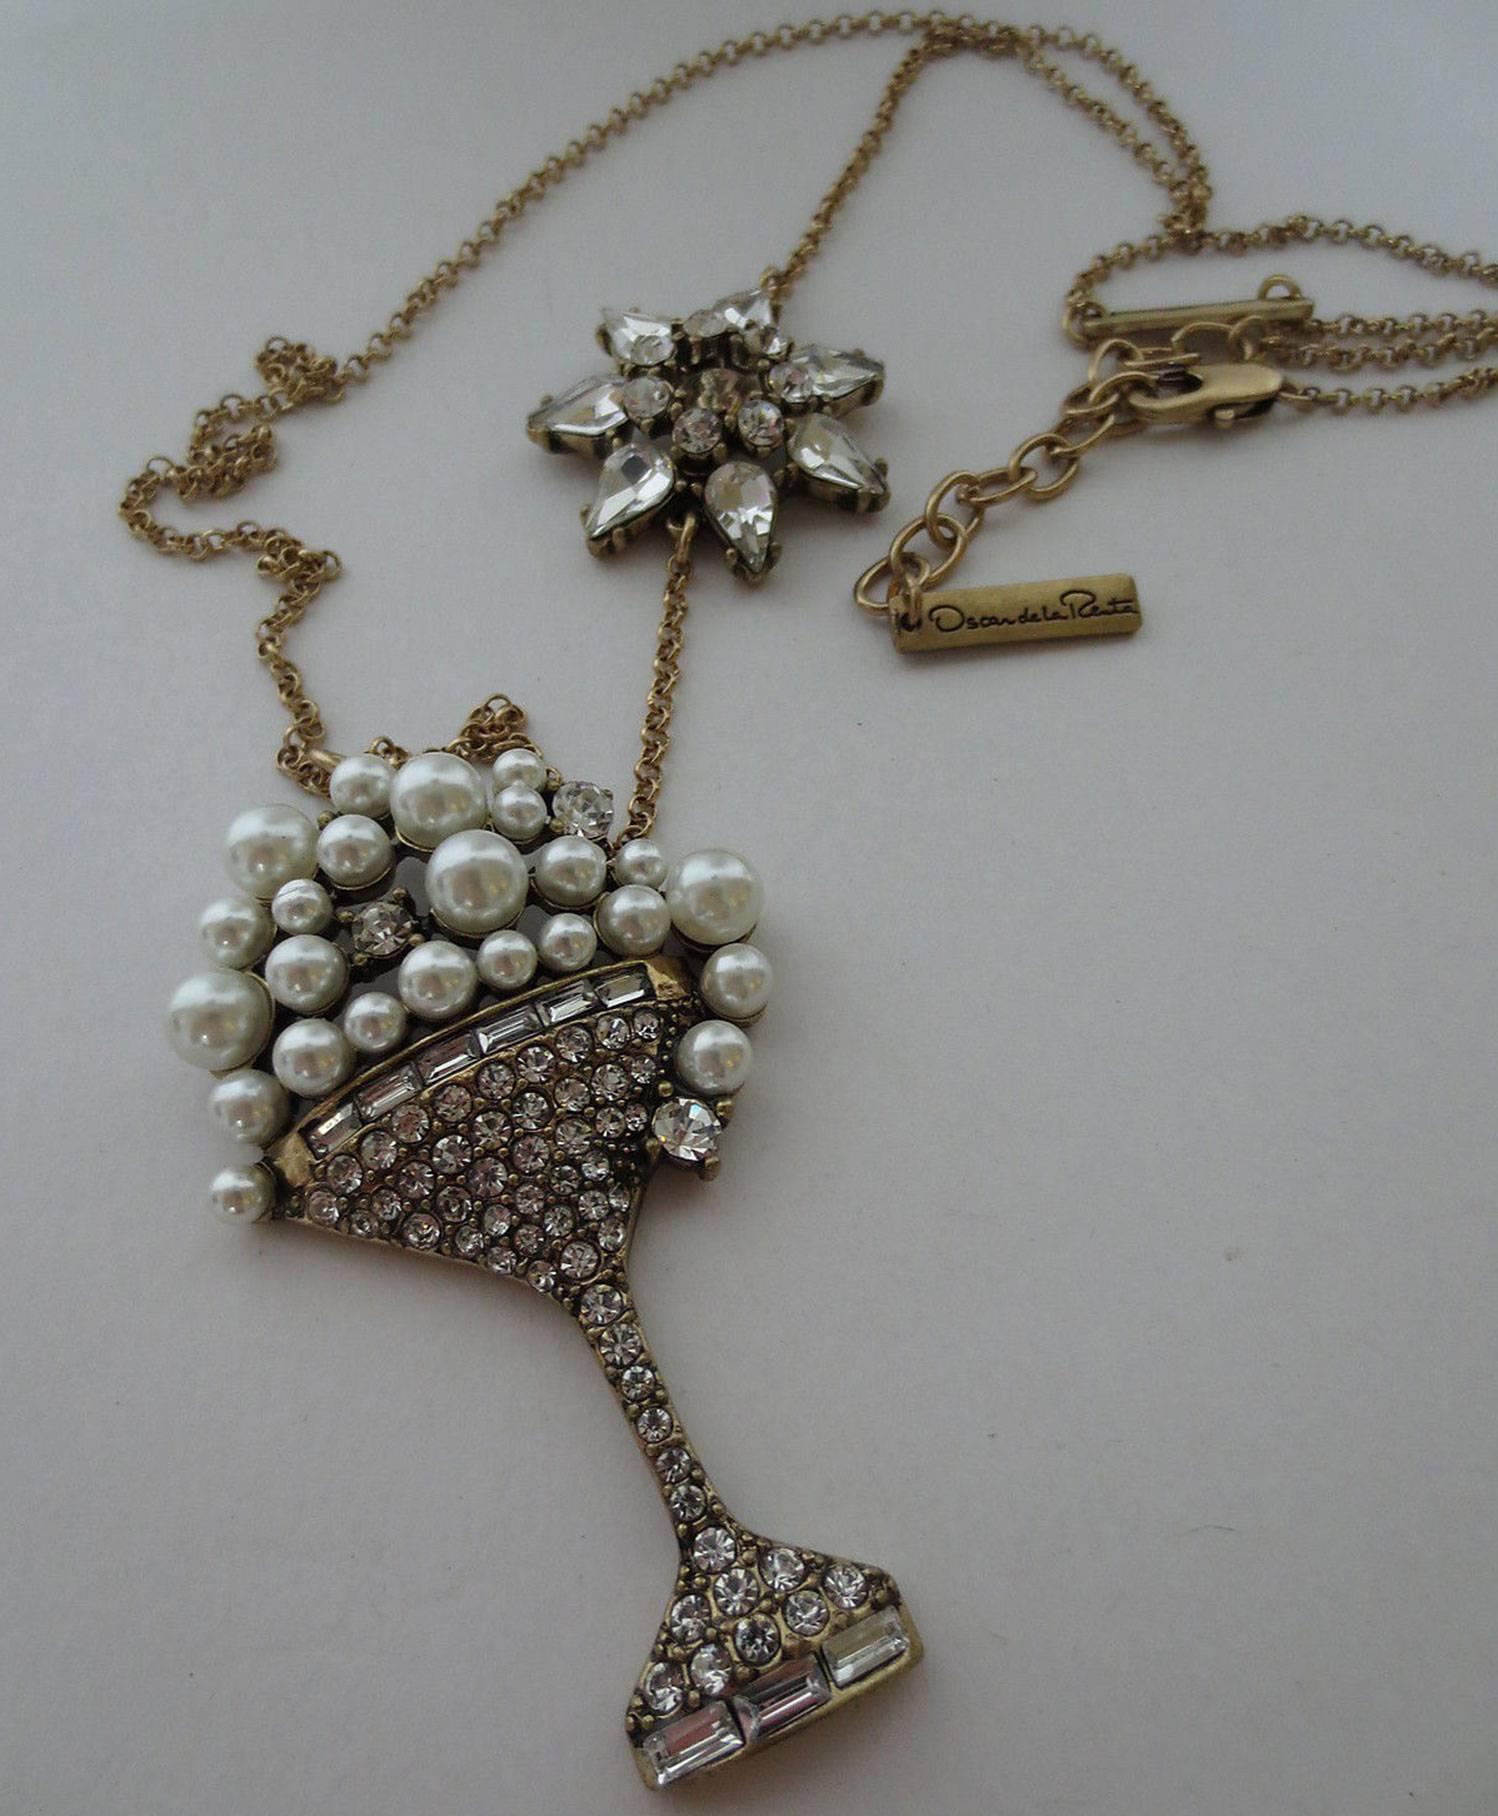 Vintage signed Oscar de la Renta Statement Designer Necklace featuring a large Jeweled champagne glass filled with bubbles of faux Pearls and Jewels; approx. sizes: necklace 33